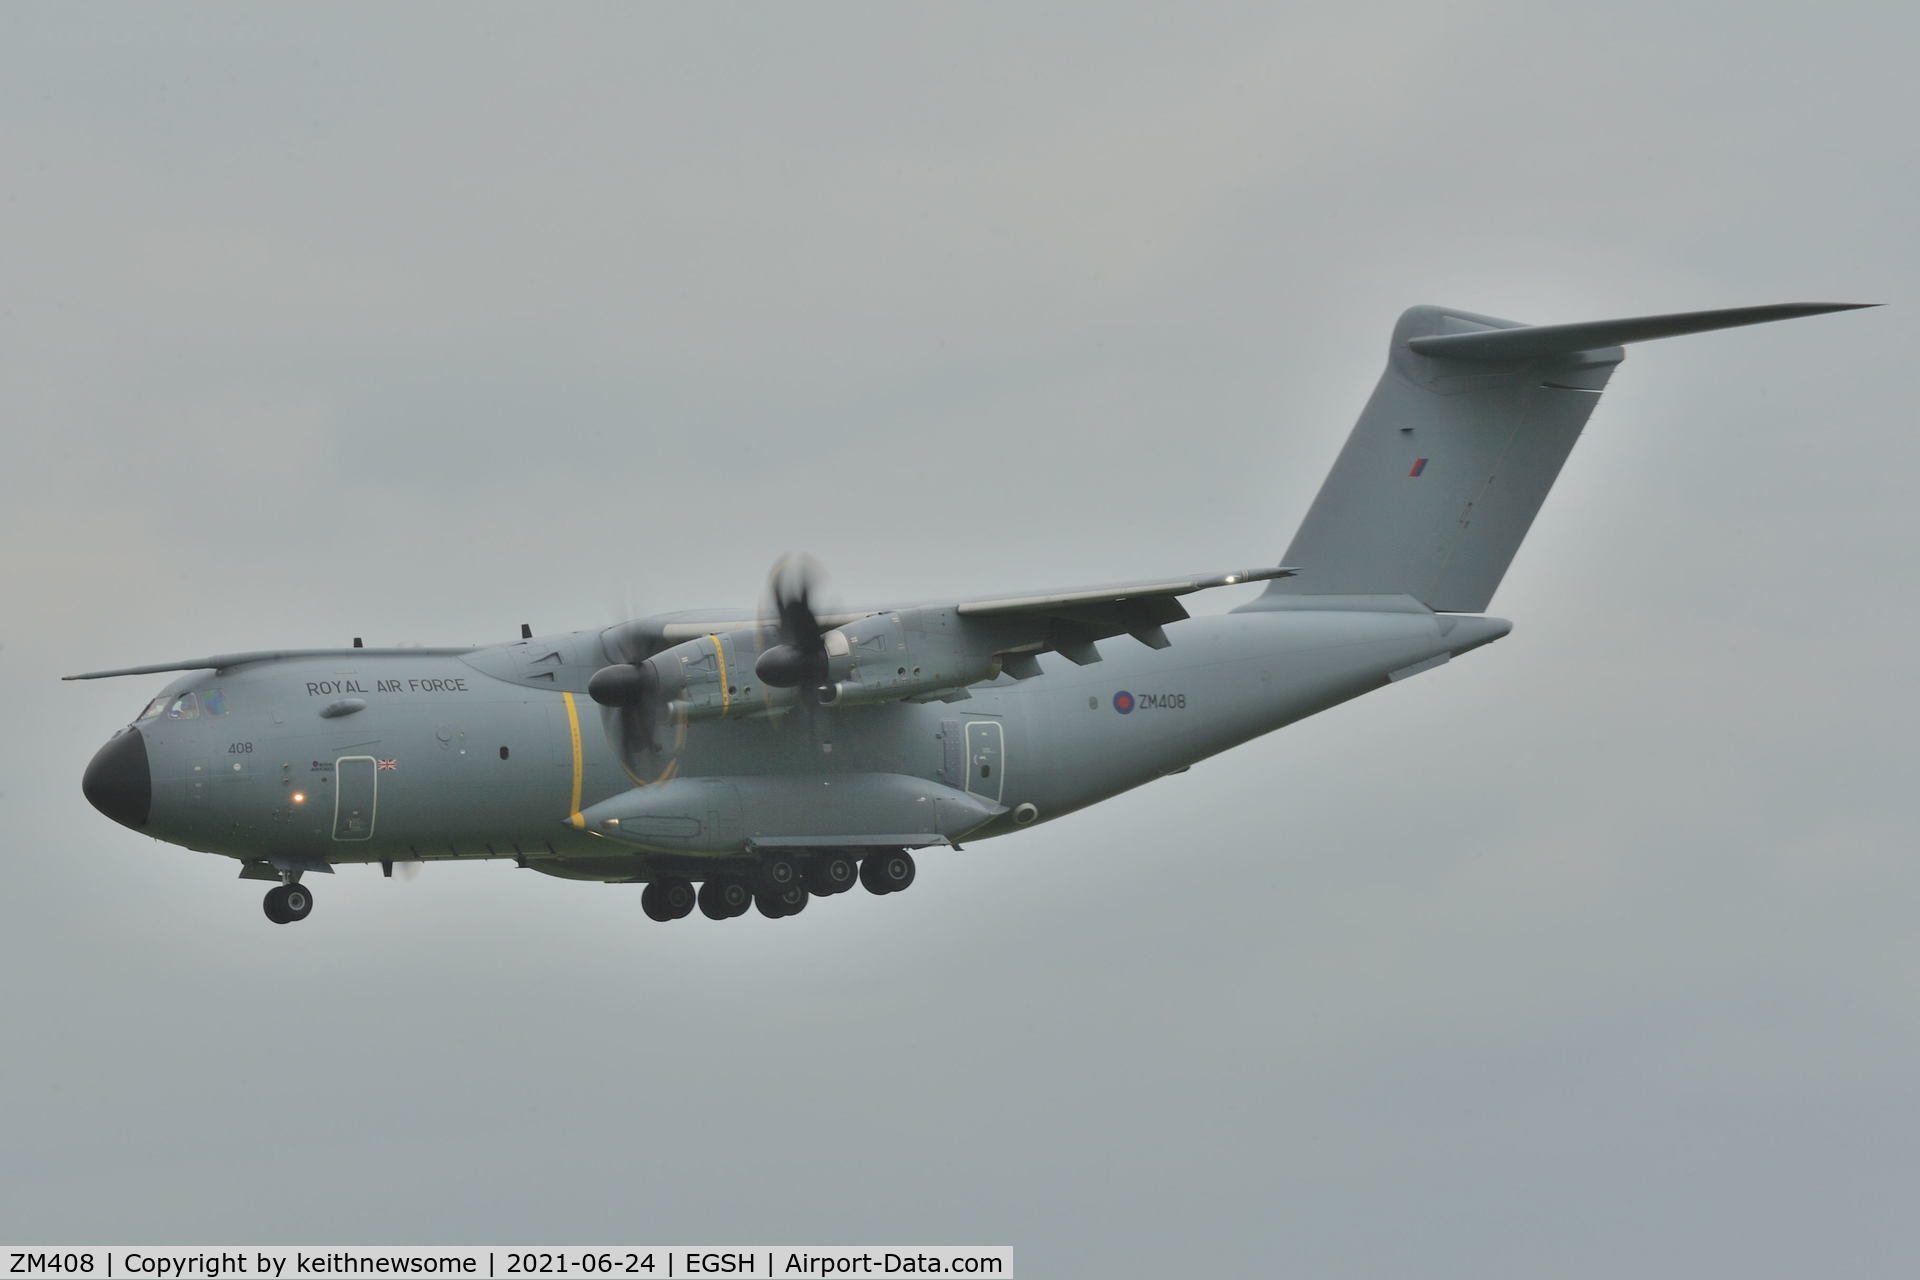 ZM408, 2015 Airbus A400M Atlas C.1 C/N 027, ILS approach to runway 27